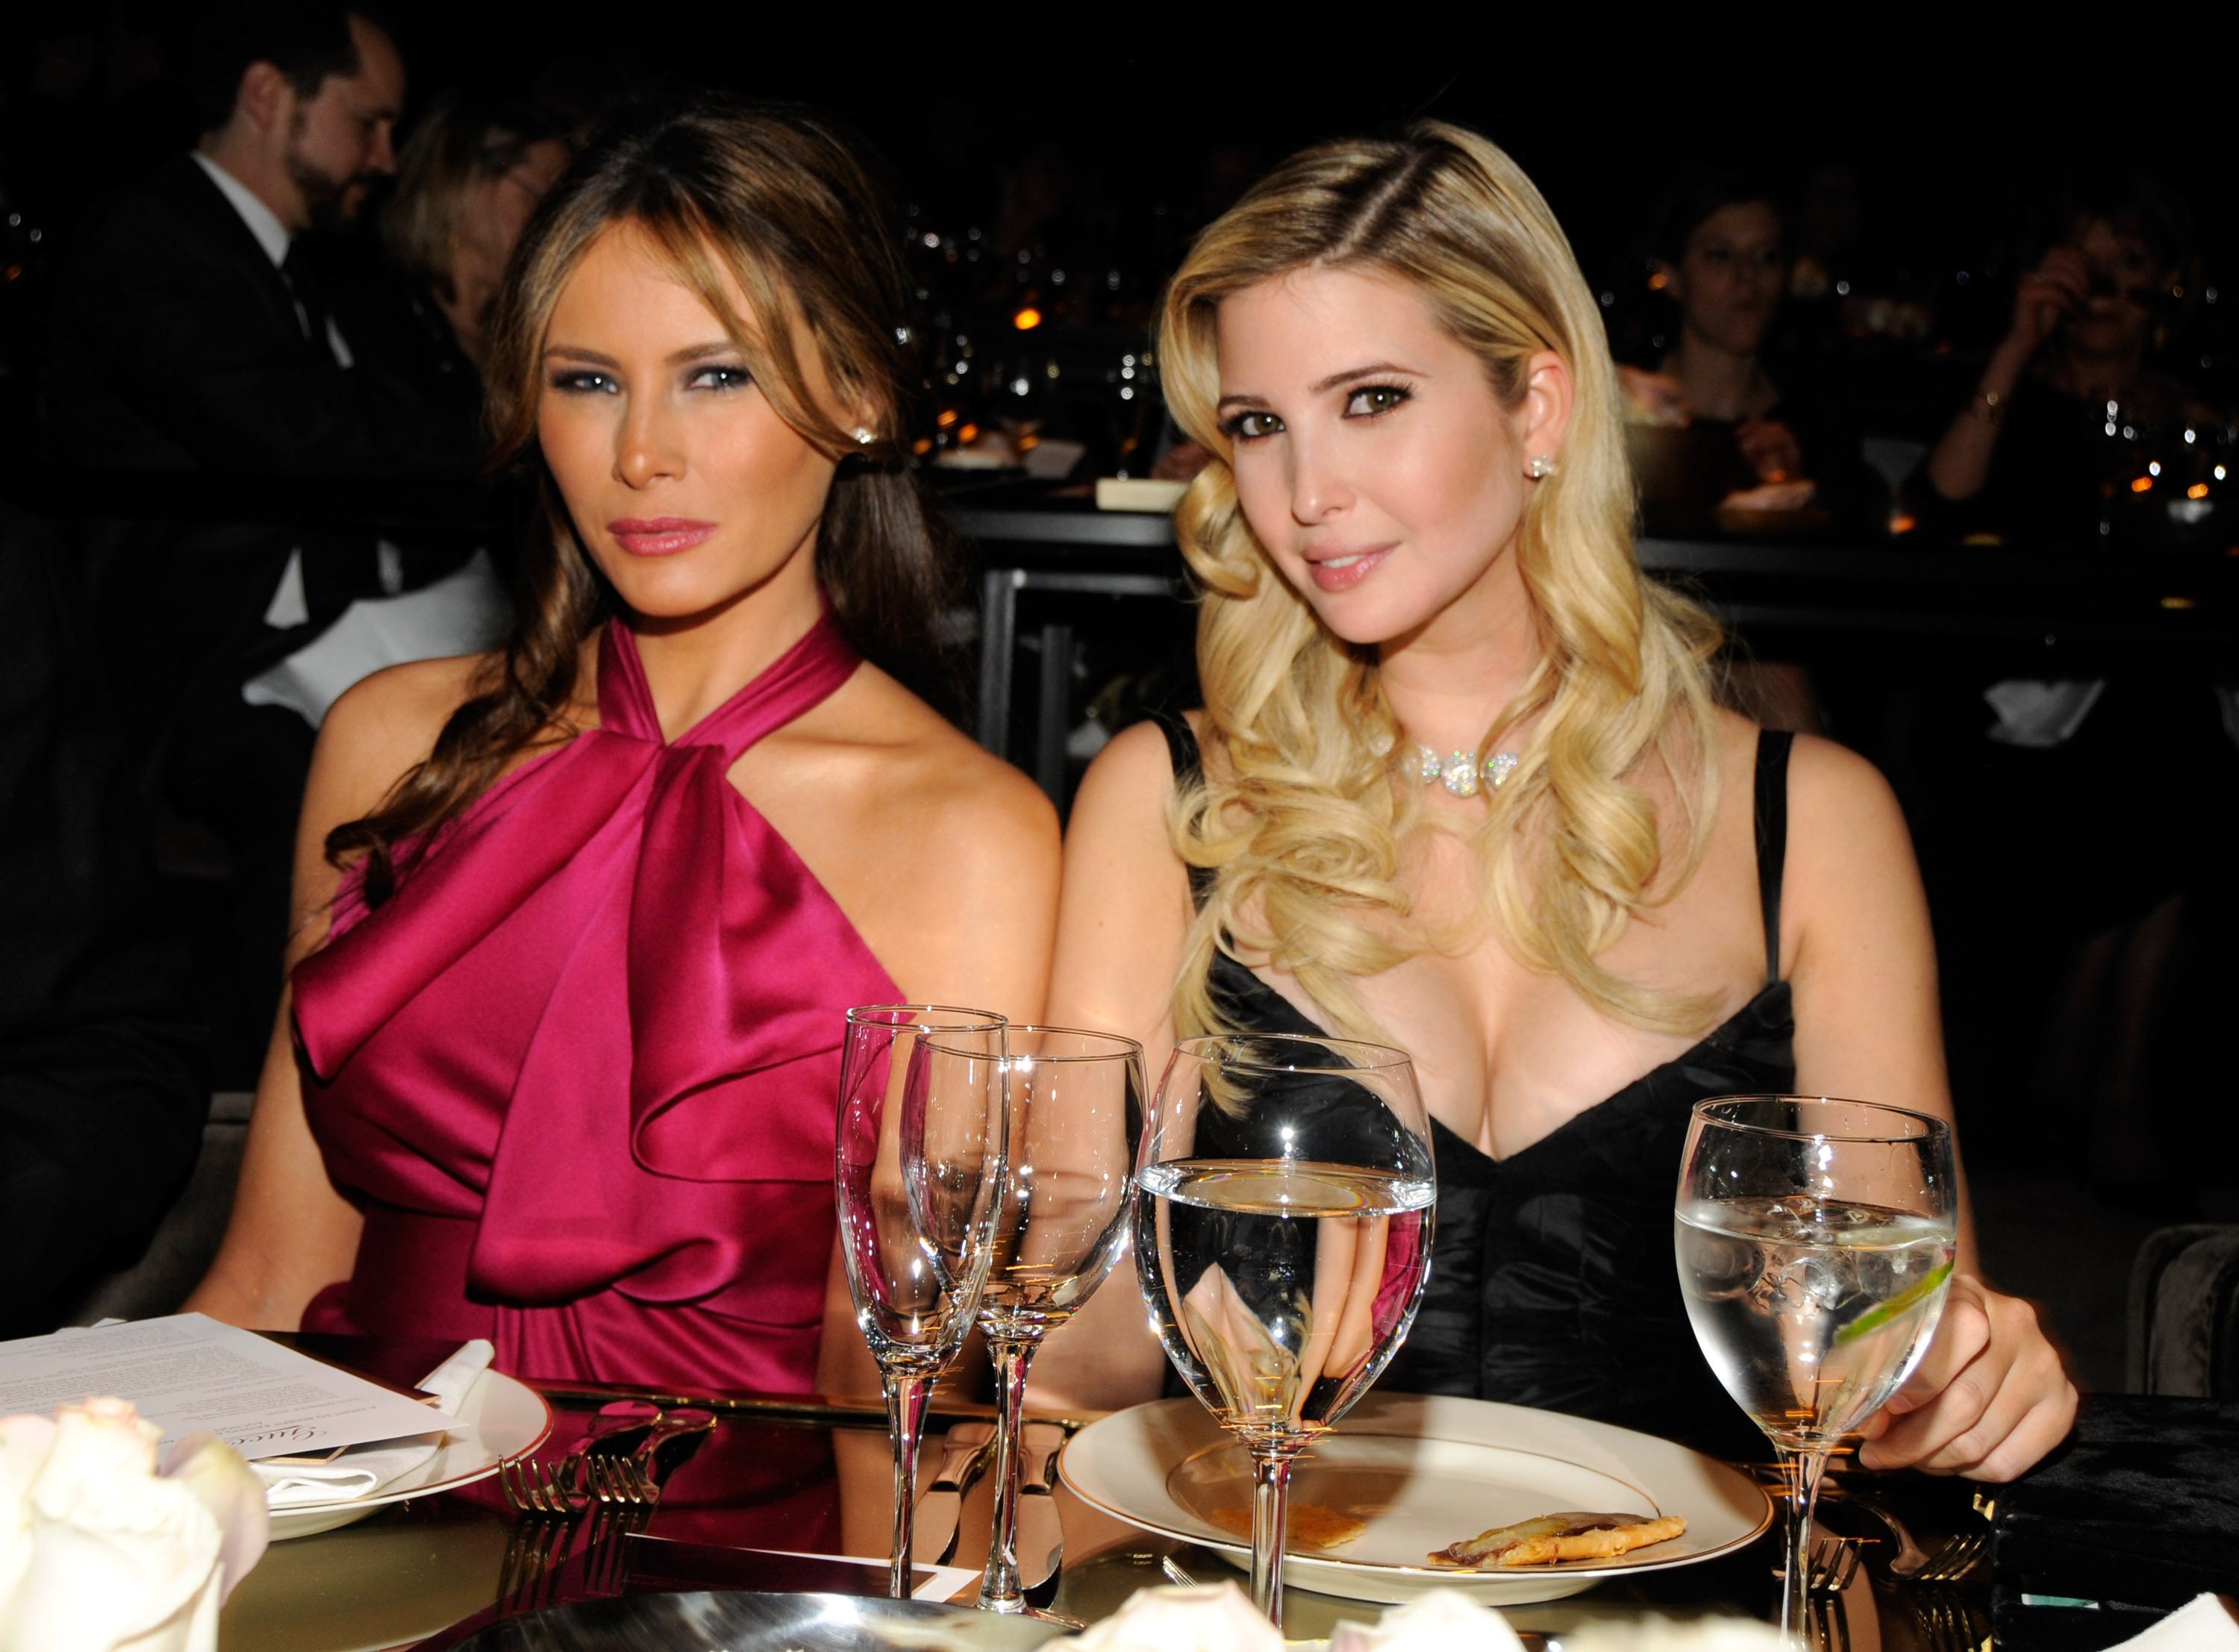 Melania Trump and Ivanka Trump inside Madonna and Gucci’s event, A Night to Benefit Raising Malawi and UNICEF, at the United Nations on February, 2007 in New York City. Photo: WireImage